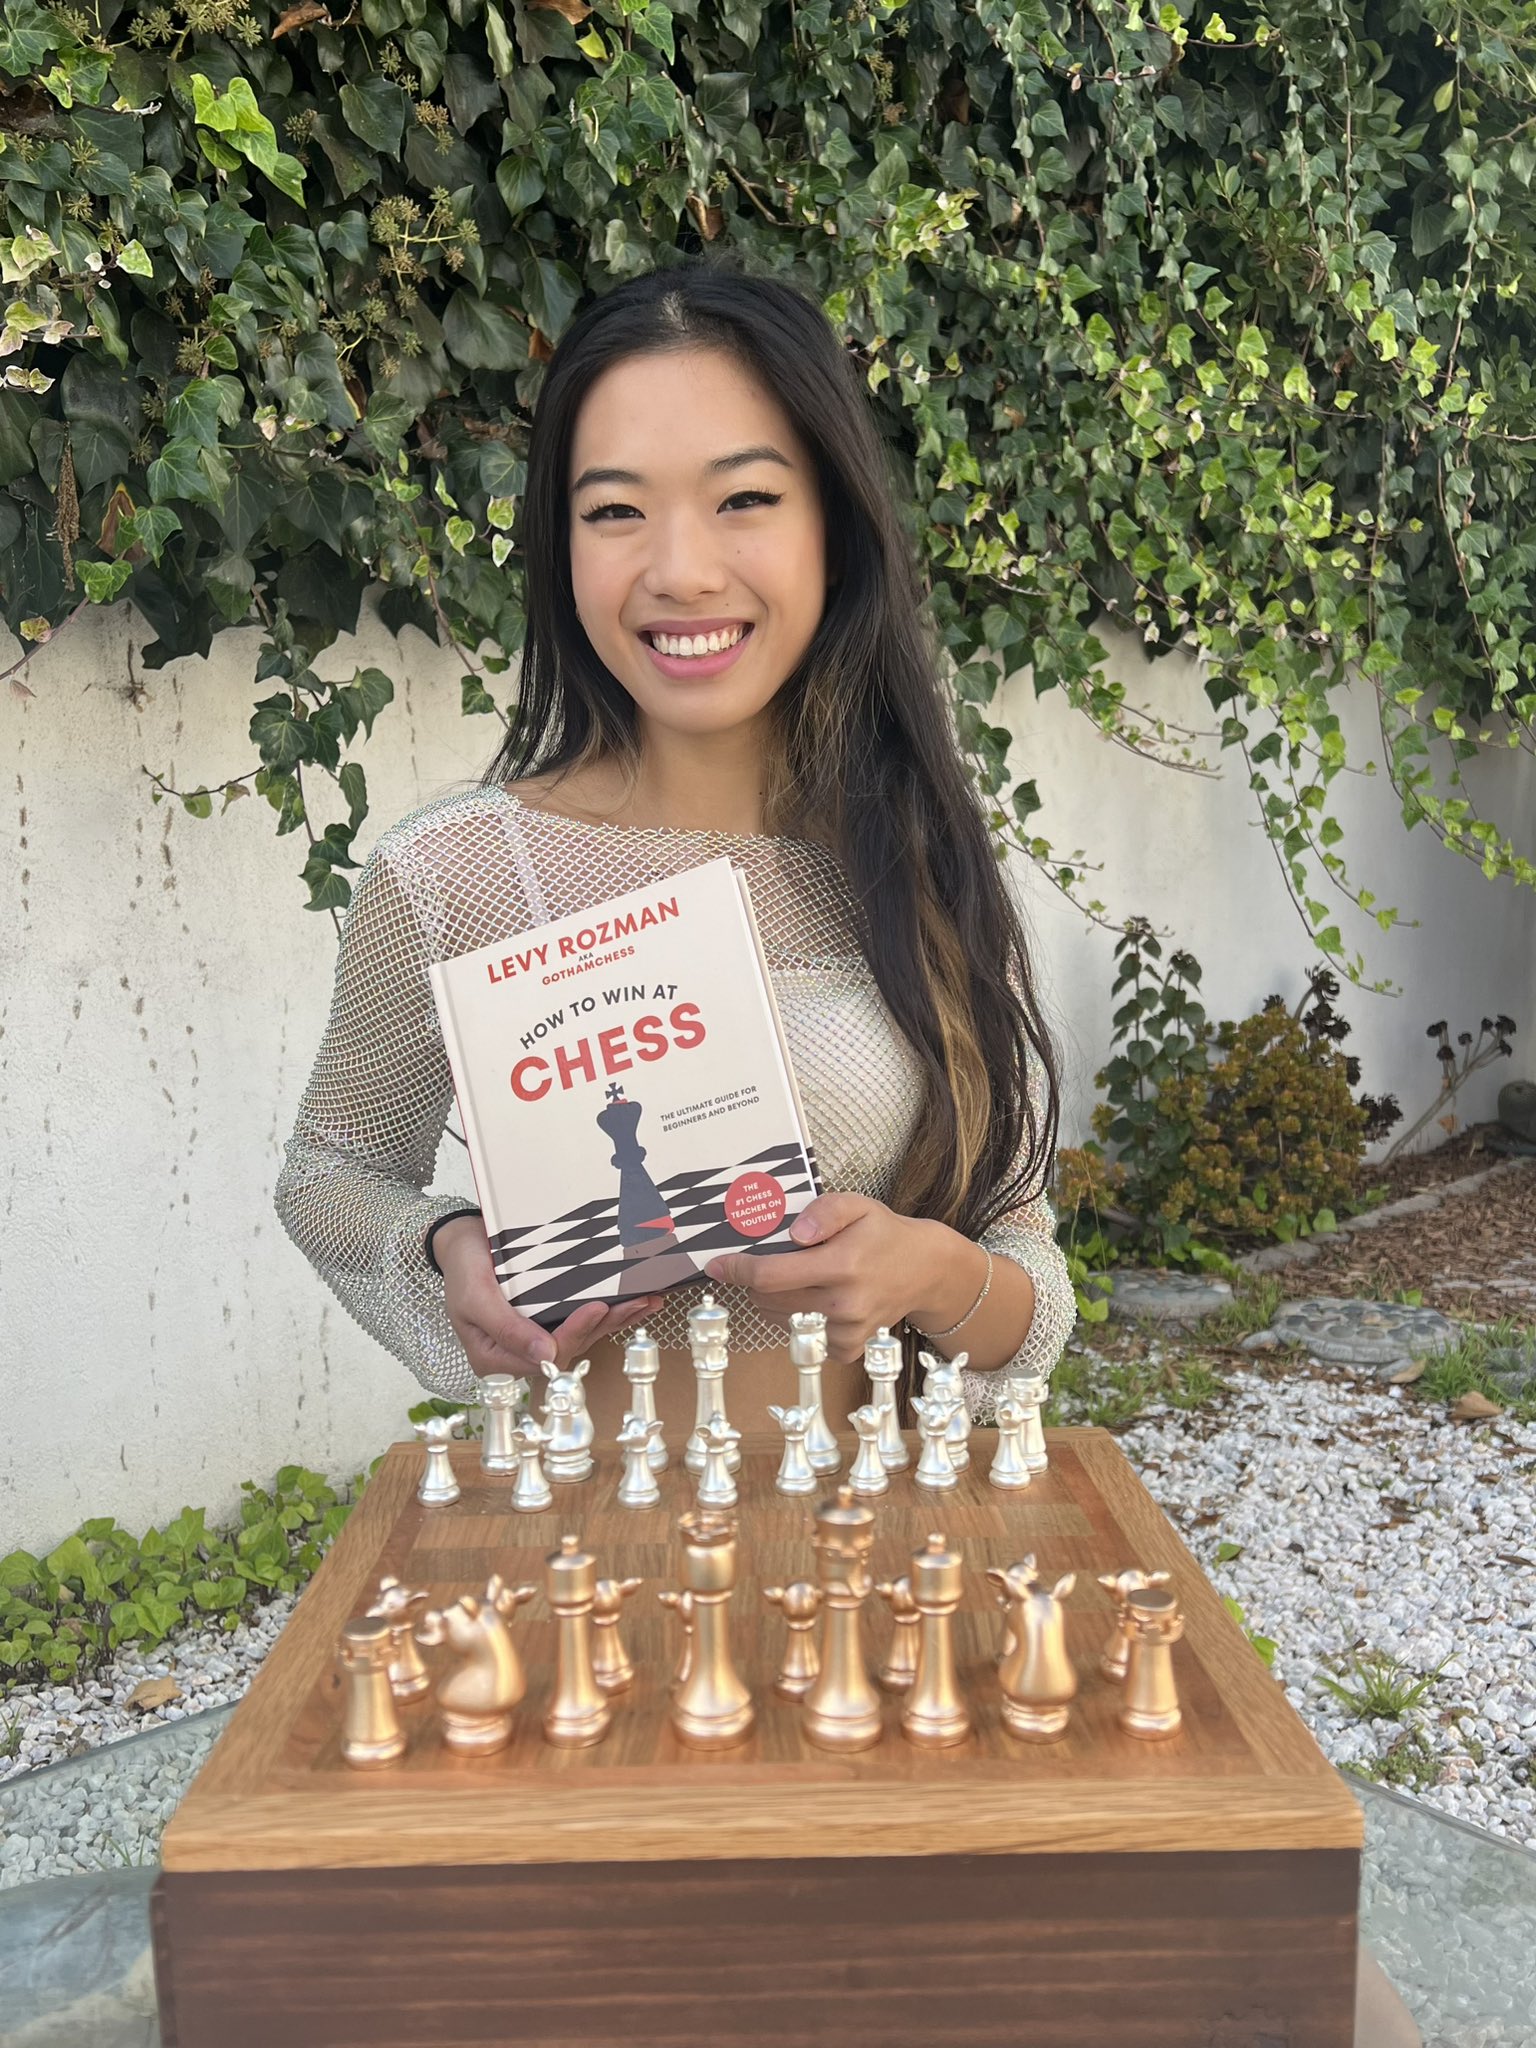 How to Win At Chess by Levy Rozman, GothamChess